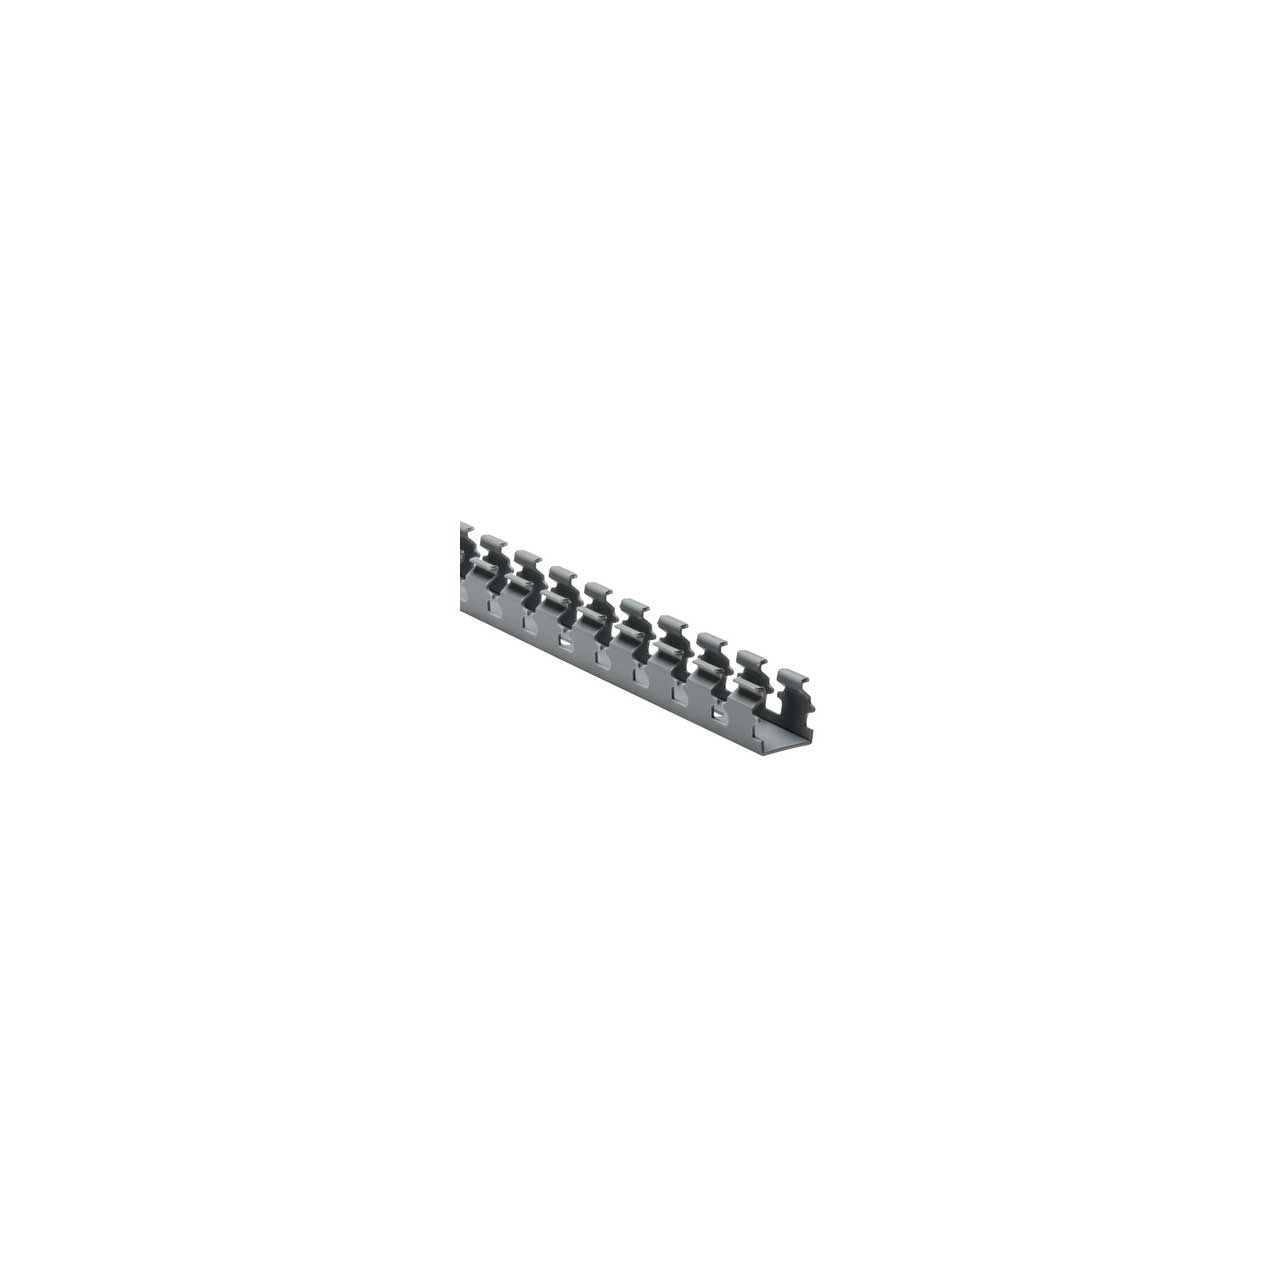 HellermannTyton 181-11013 Non-Adhesive Slotted Wall Duct 1x1-Inch x6 Foot - Gray - 20 Pack 181-11013-20